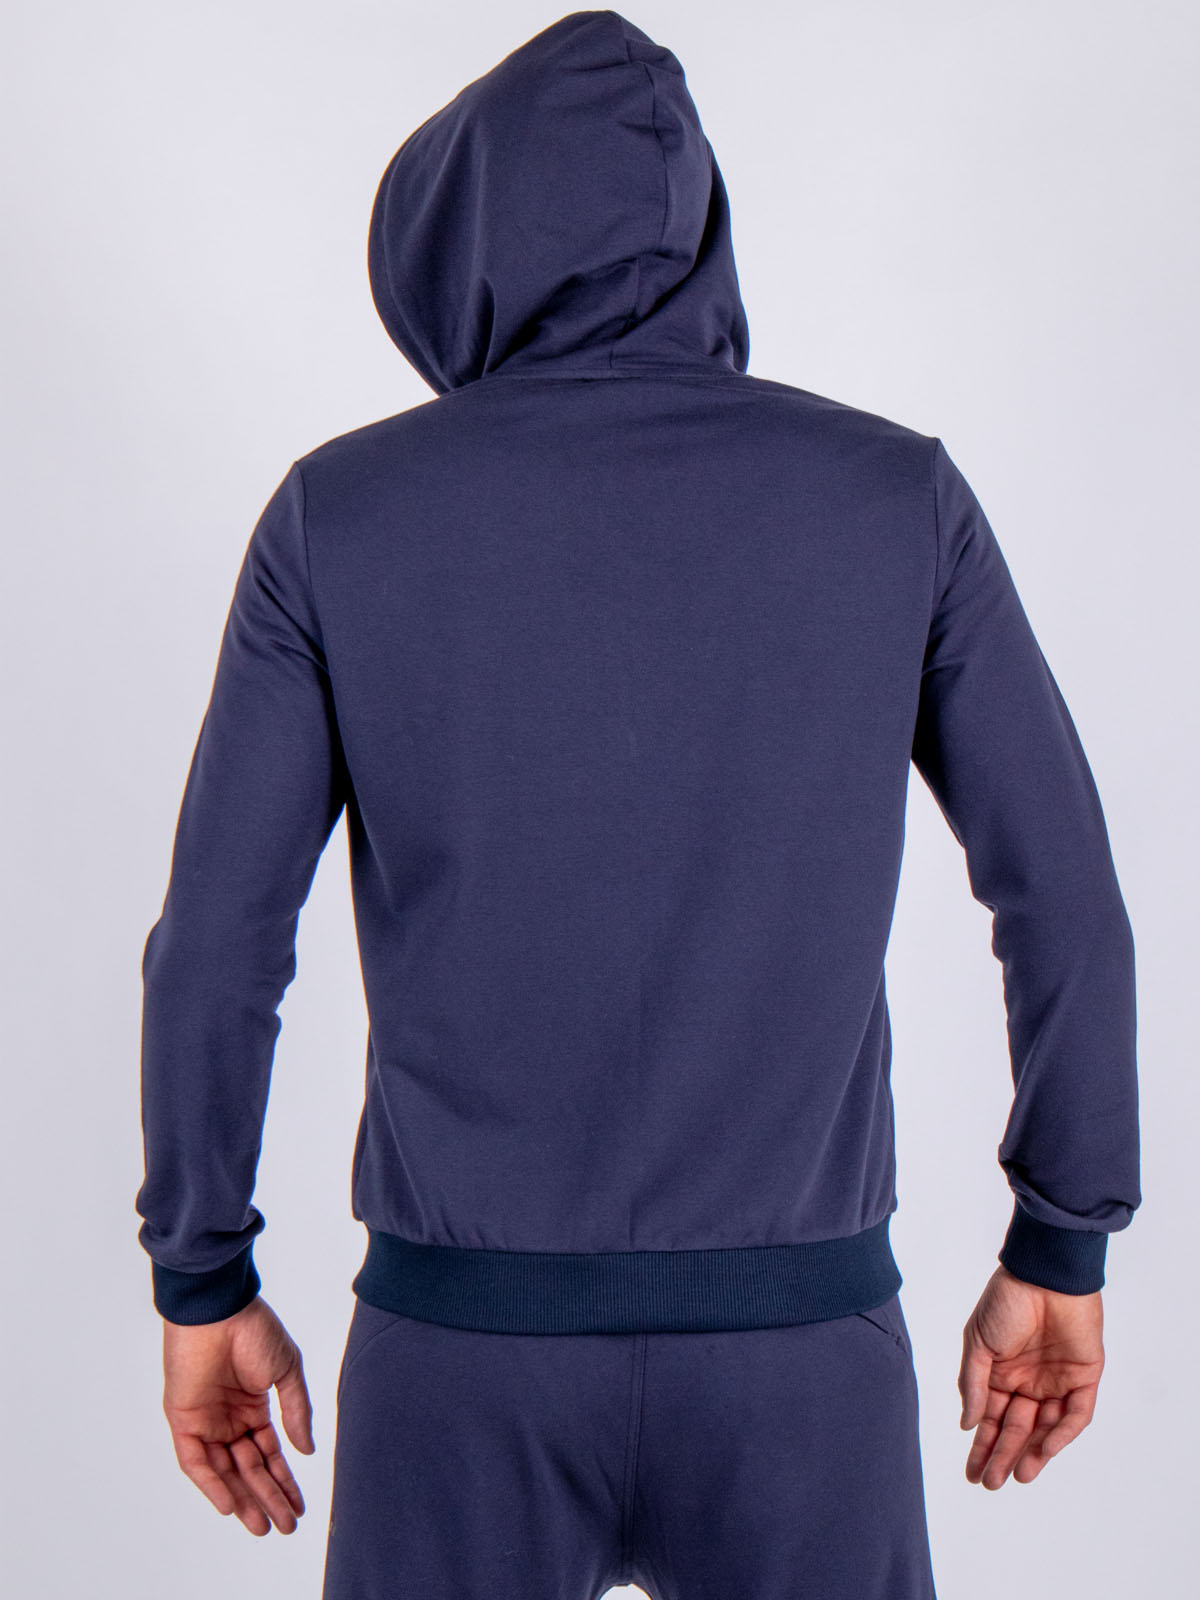 Sports sweatshirt in blue with a hood - 28094 € 27.56 img3